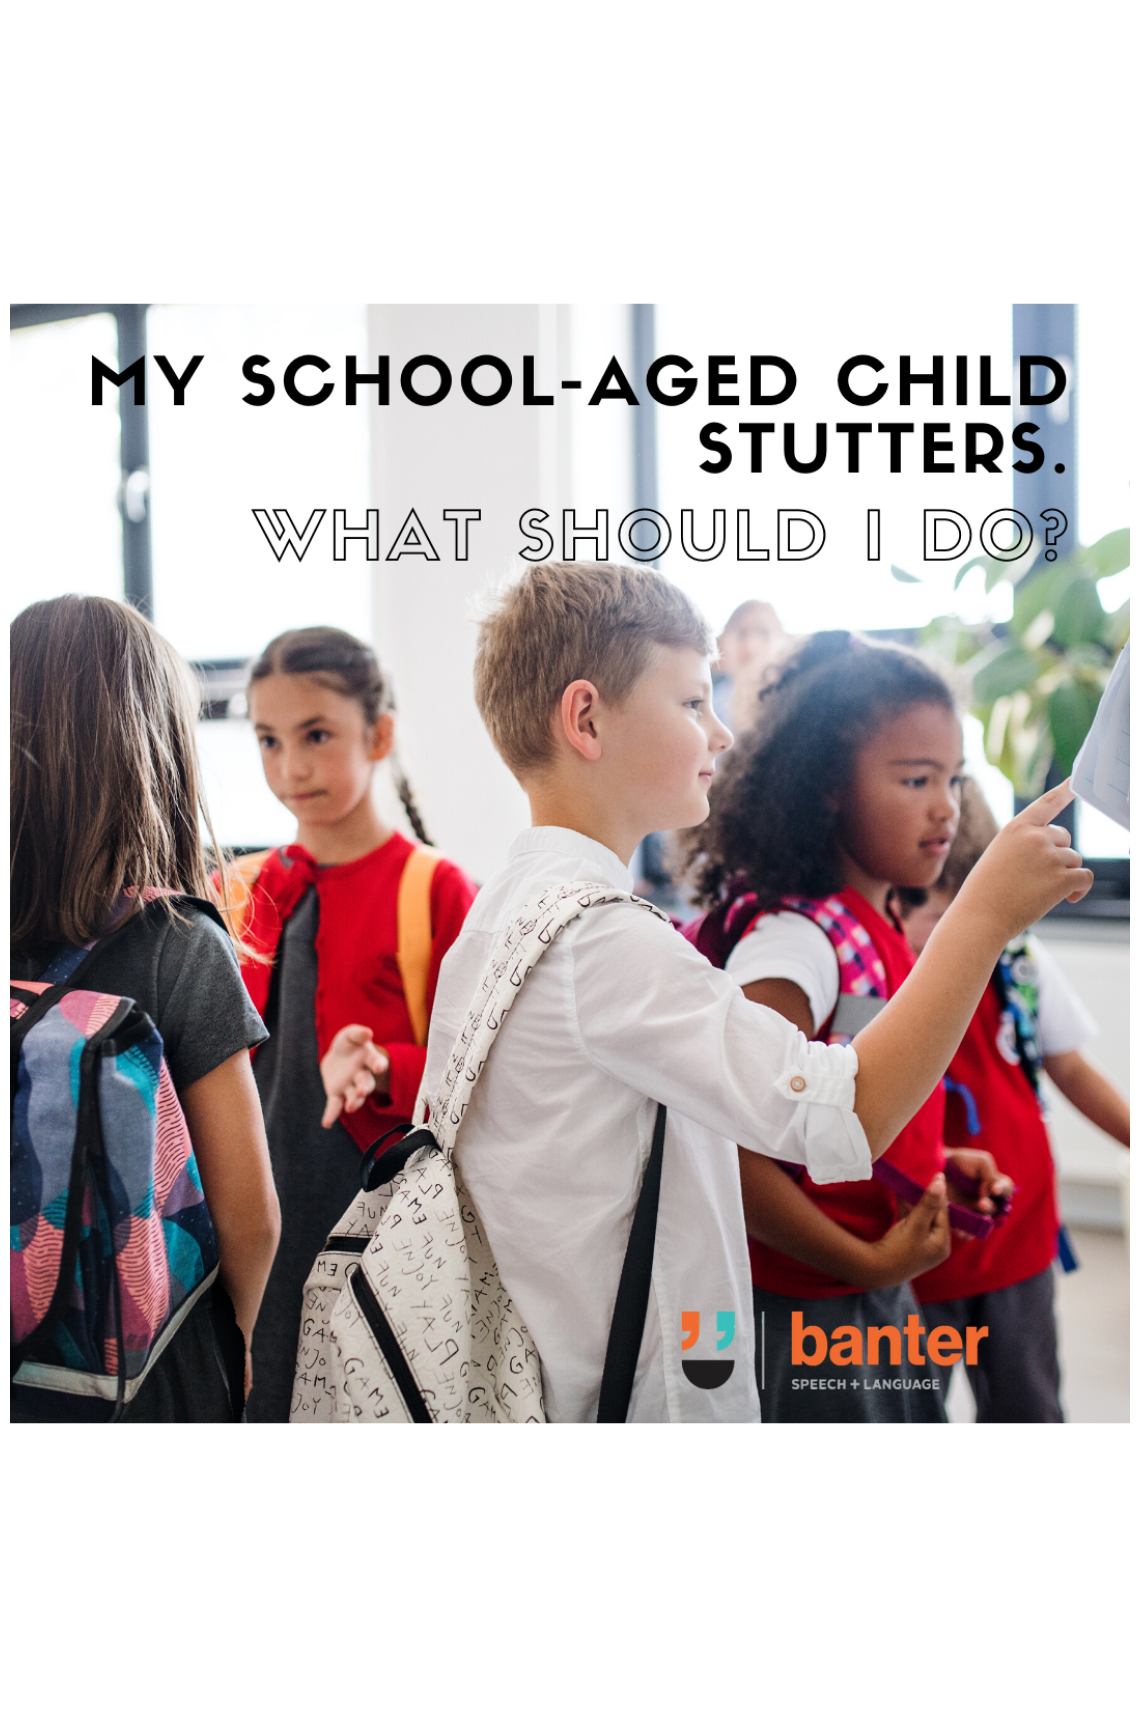 My school-aged child stutters. What should I do?